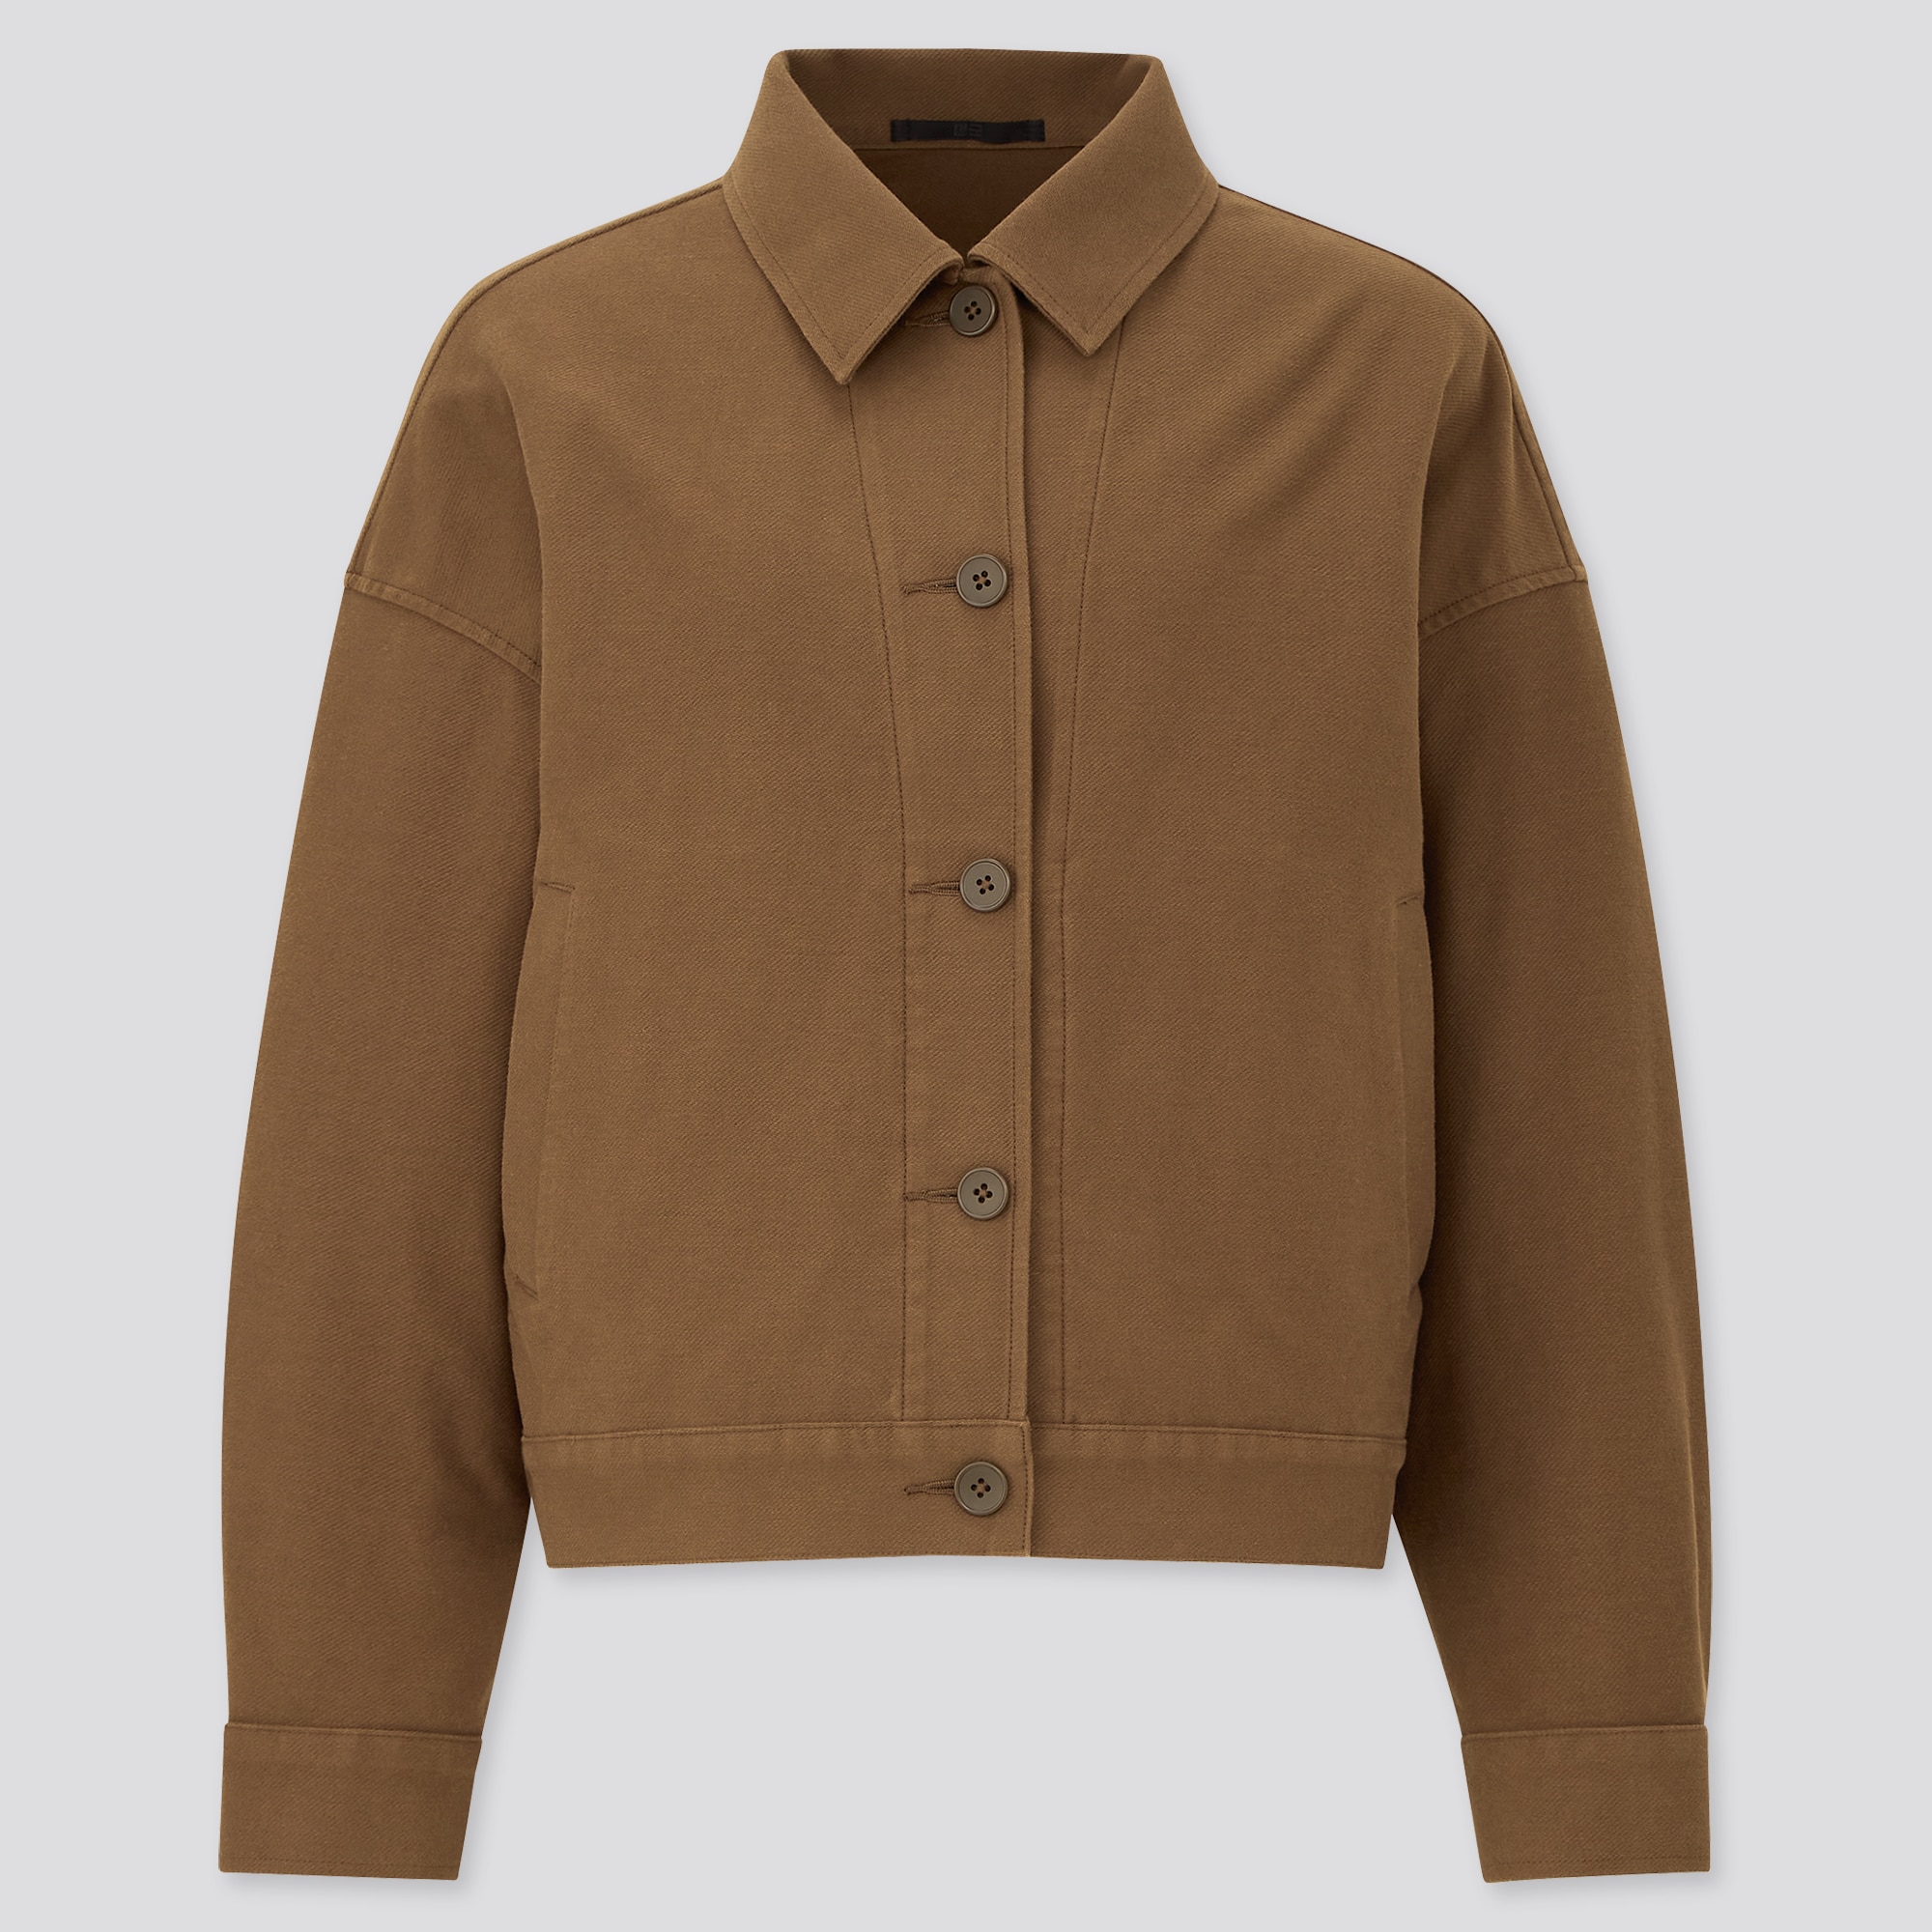 UNIQLO Jacket  Washed Jersey Work Jacket Mens Fashion Coats Jackets  and Outerwear on Carousell